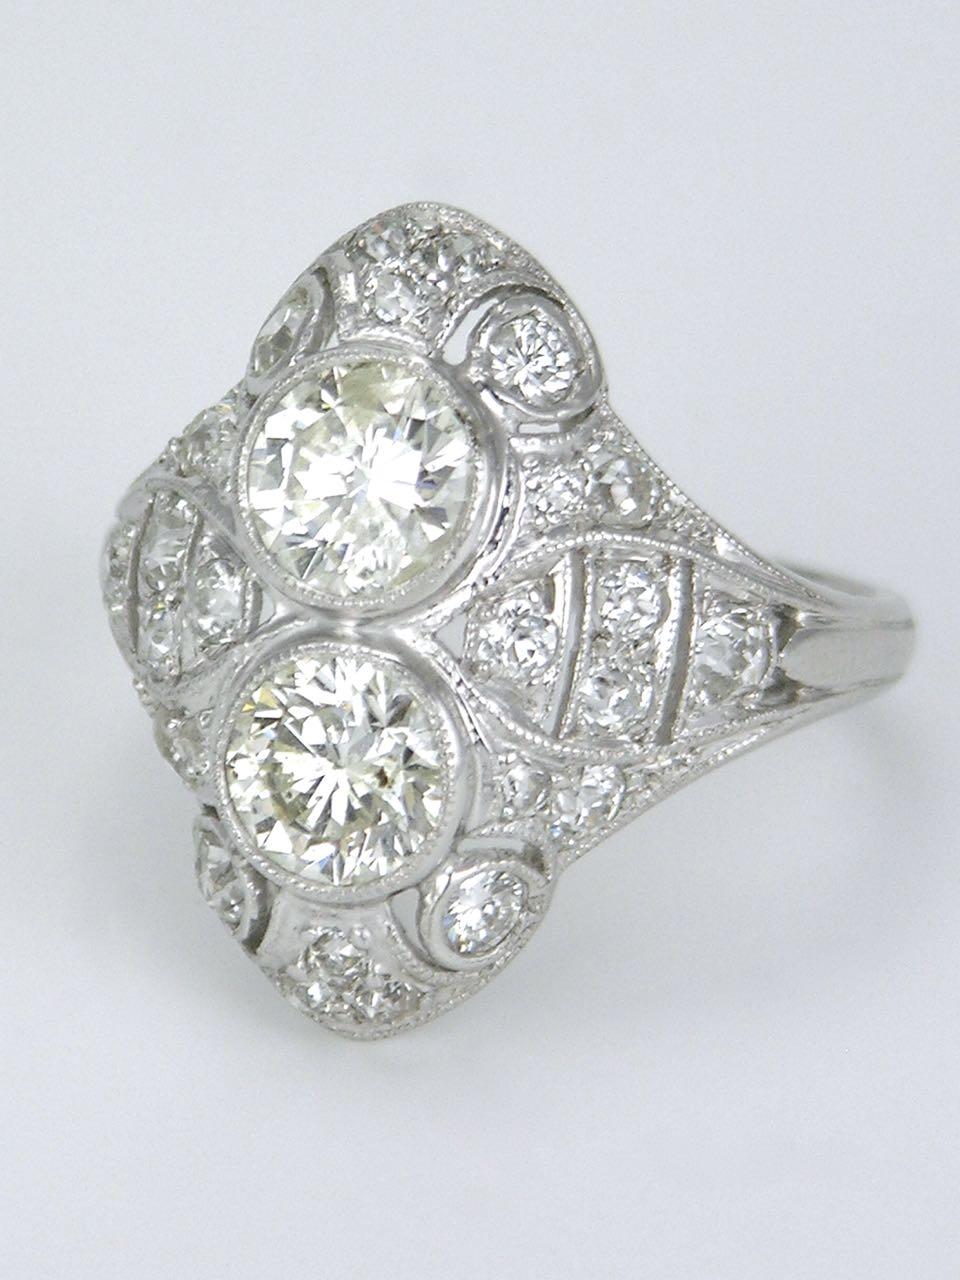 A stunning Art Deco diamond and platinum two stone ring consisting of a pair of brilliant cut diamonds bezel set and surrounded by 24 old cut diamonds in a fretted plaque setting.  This is a truely beautiful design that sits low on the hand and